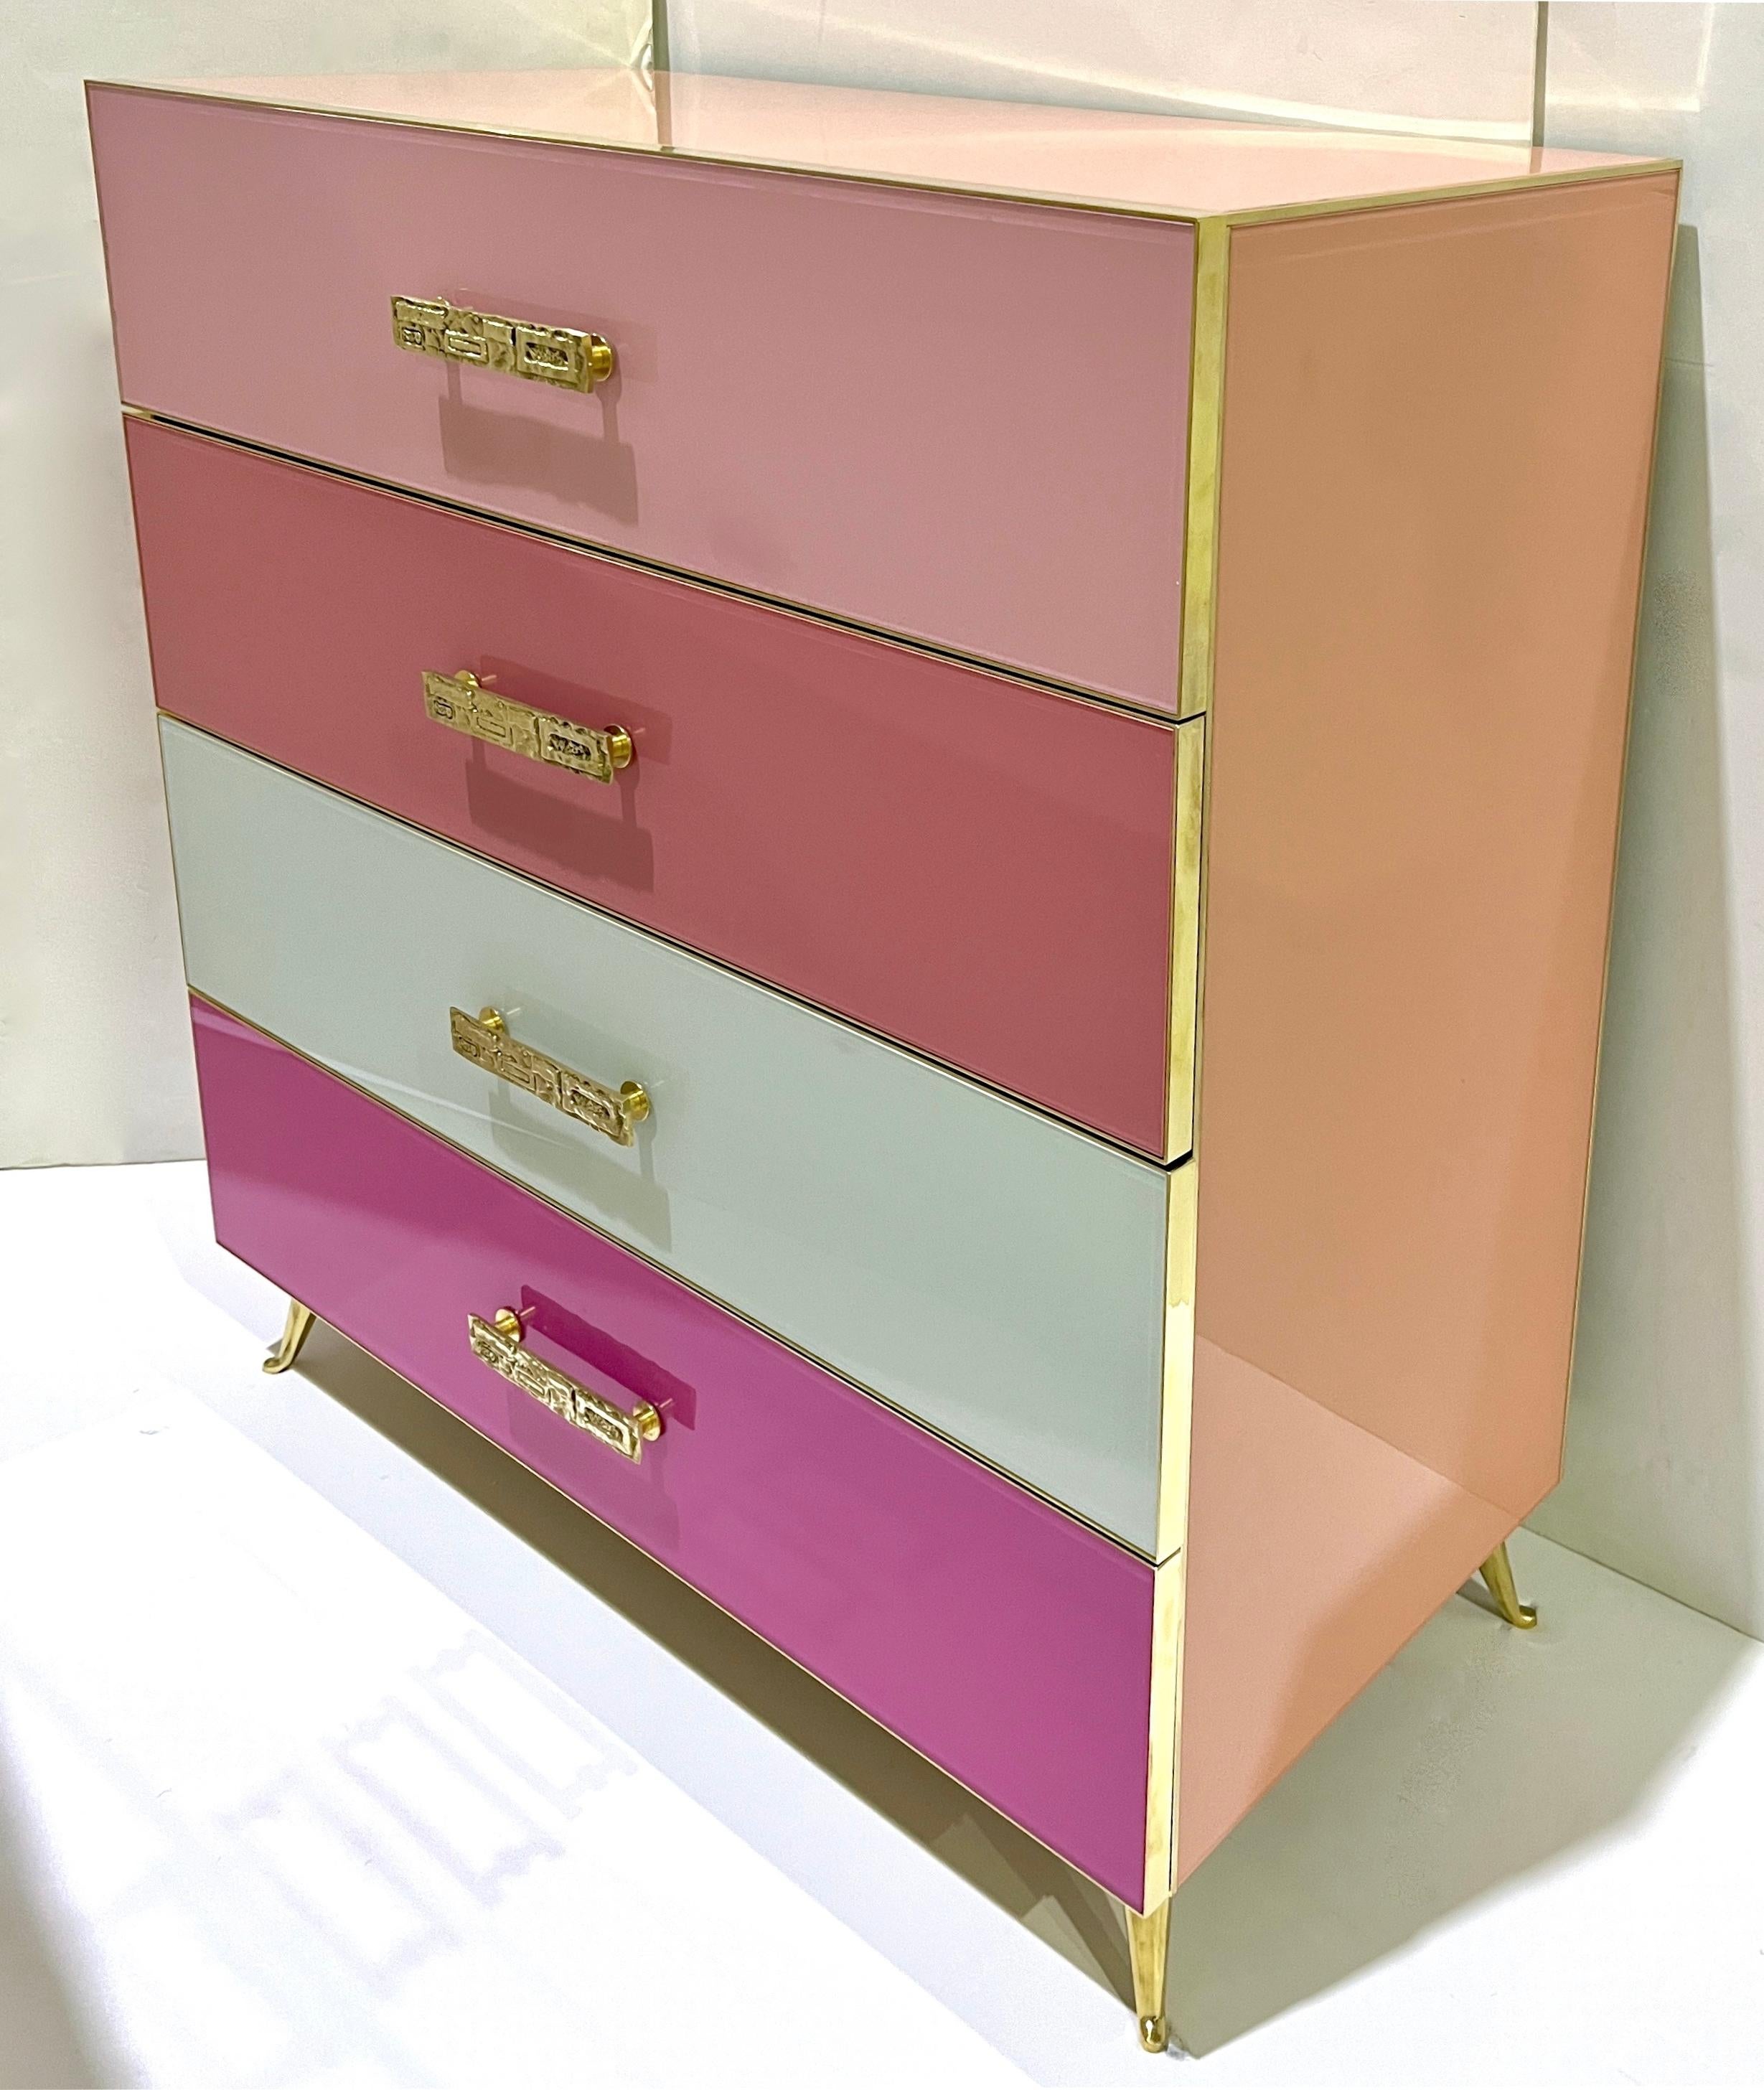 What we love about this piece is not only the functionality with its 4 drawers (options for sizes) but the artistic impact of the different tints in this customizable minimalist design with the exceptional hardware, the choice of colors is